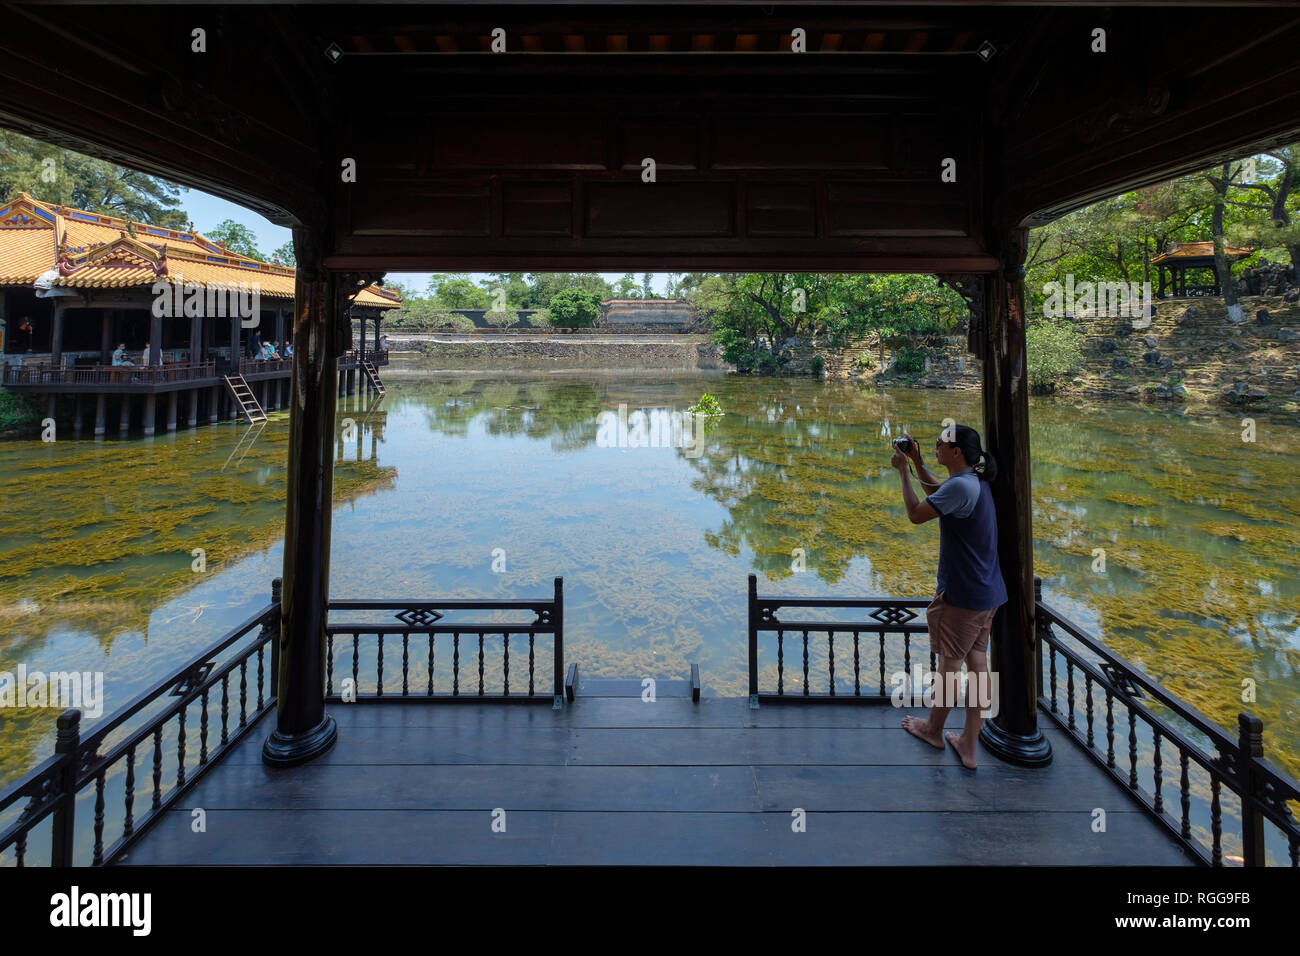 Western tourist taking pictures of the Xung Khiem pavilion at the Emperor Tu Duc tomb complex in Hue, Vietnam, Asia Stock Photo